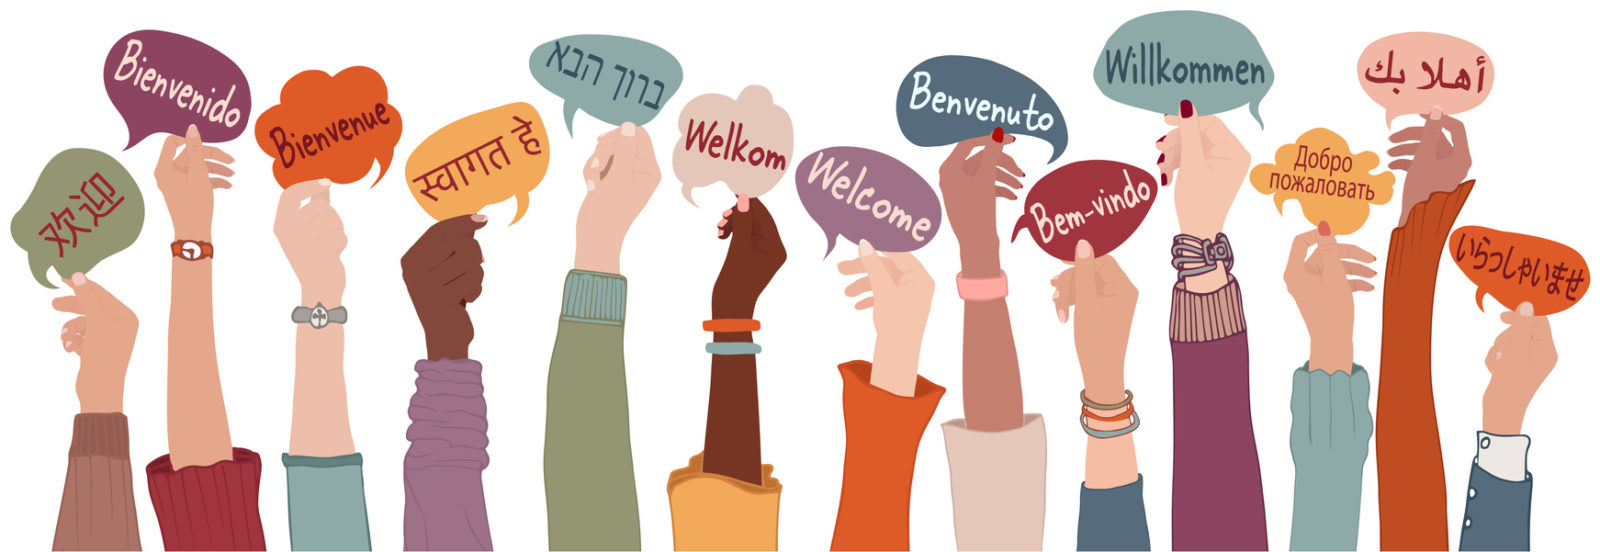 Illustration of 13 raised arms holding signs with welcome messages in different languages